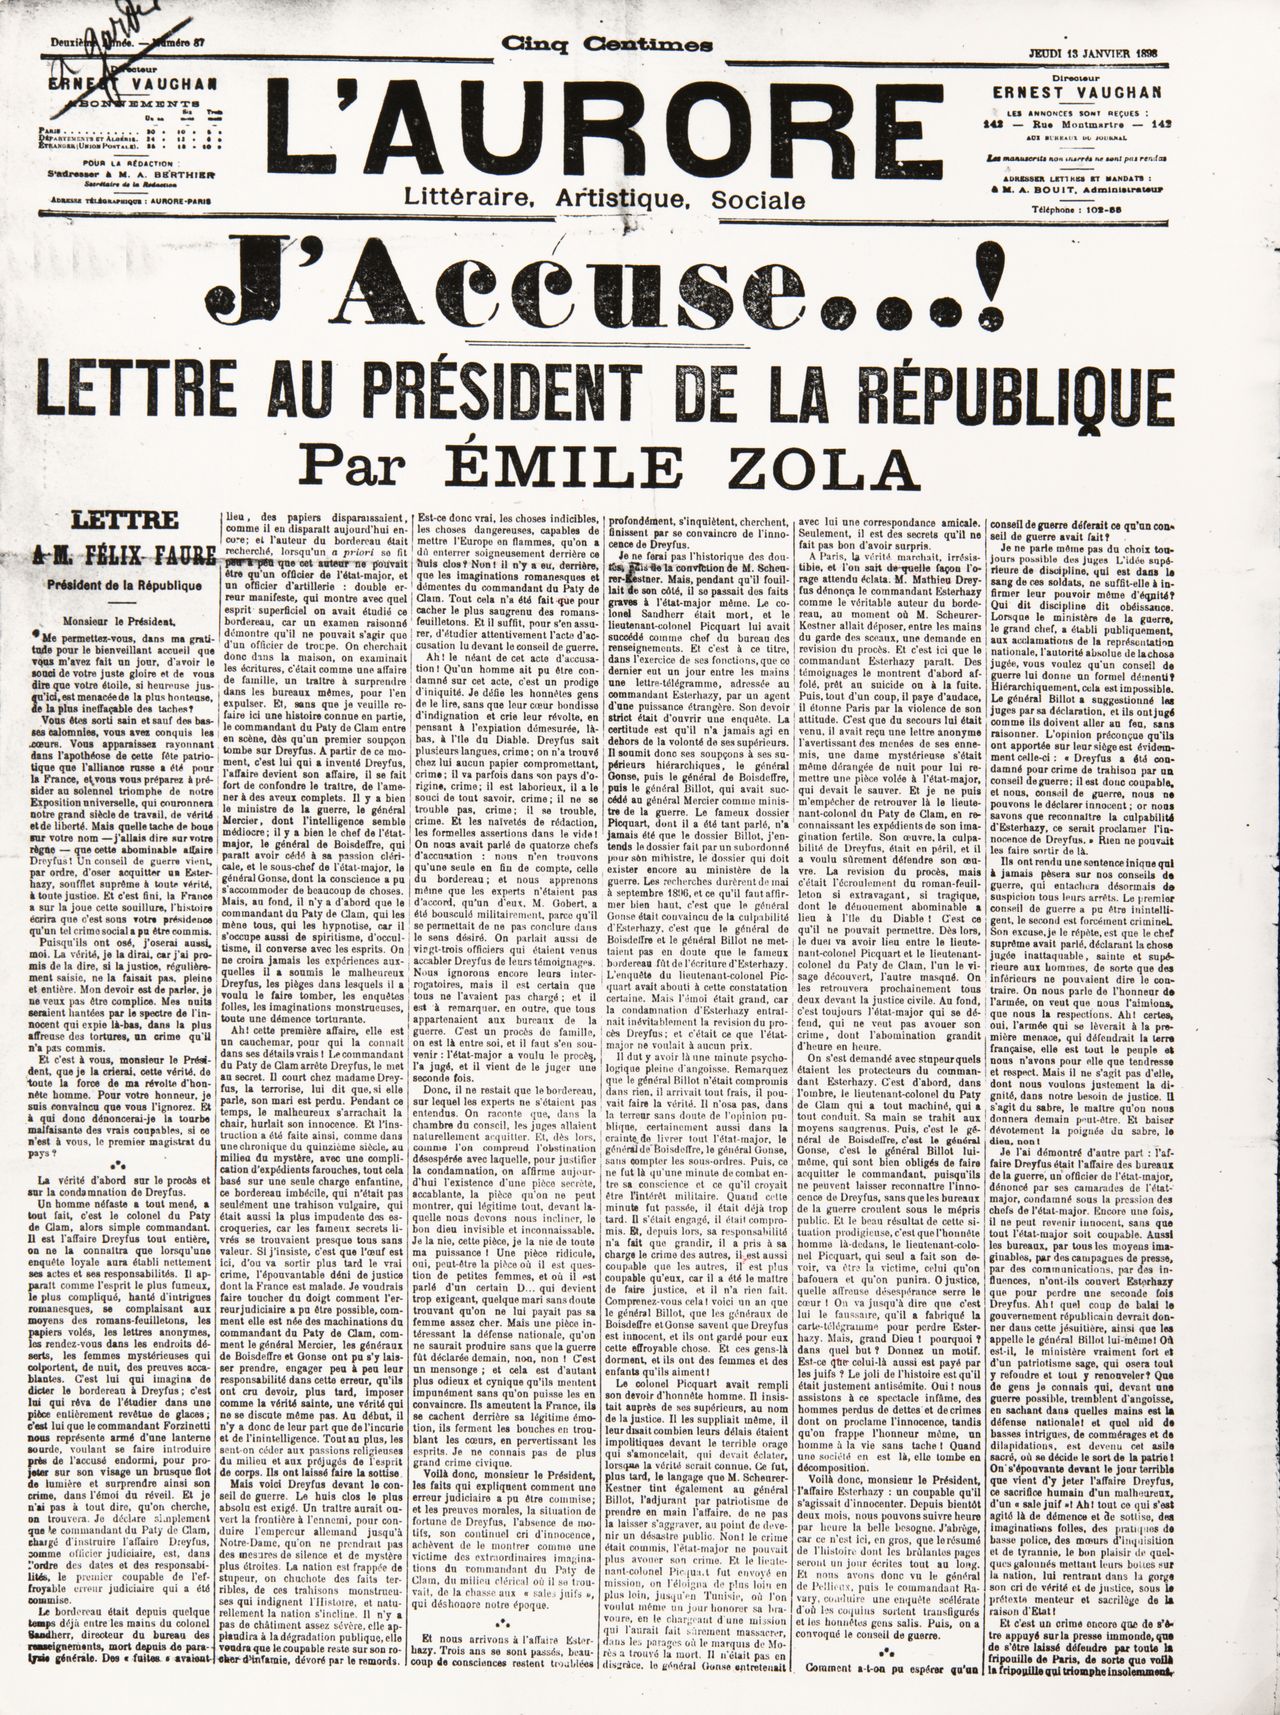 Poster. J'Accuse..!', letter by Emile Zola (1840-1902) to the French President Felix Faure, published in L'Aurore newspaper's front page, January 13rd, 1898. Private Collection. (Photo by: Christophel Fine Art/Universal Images Group via Getty Images)